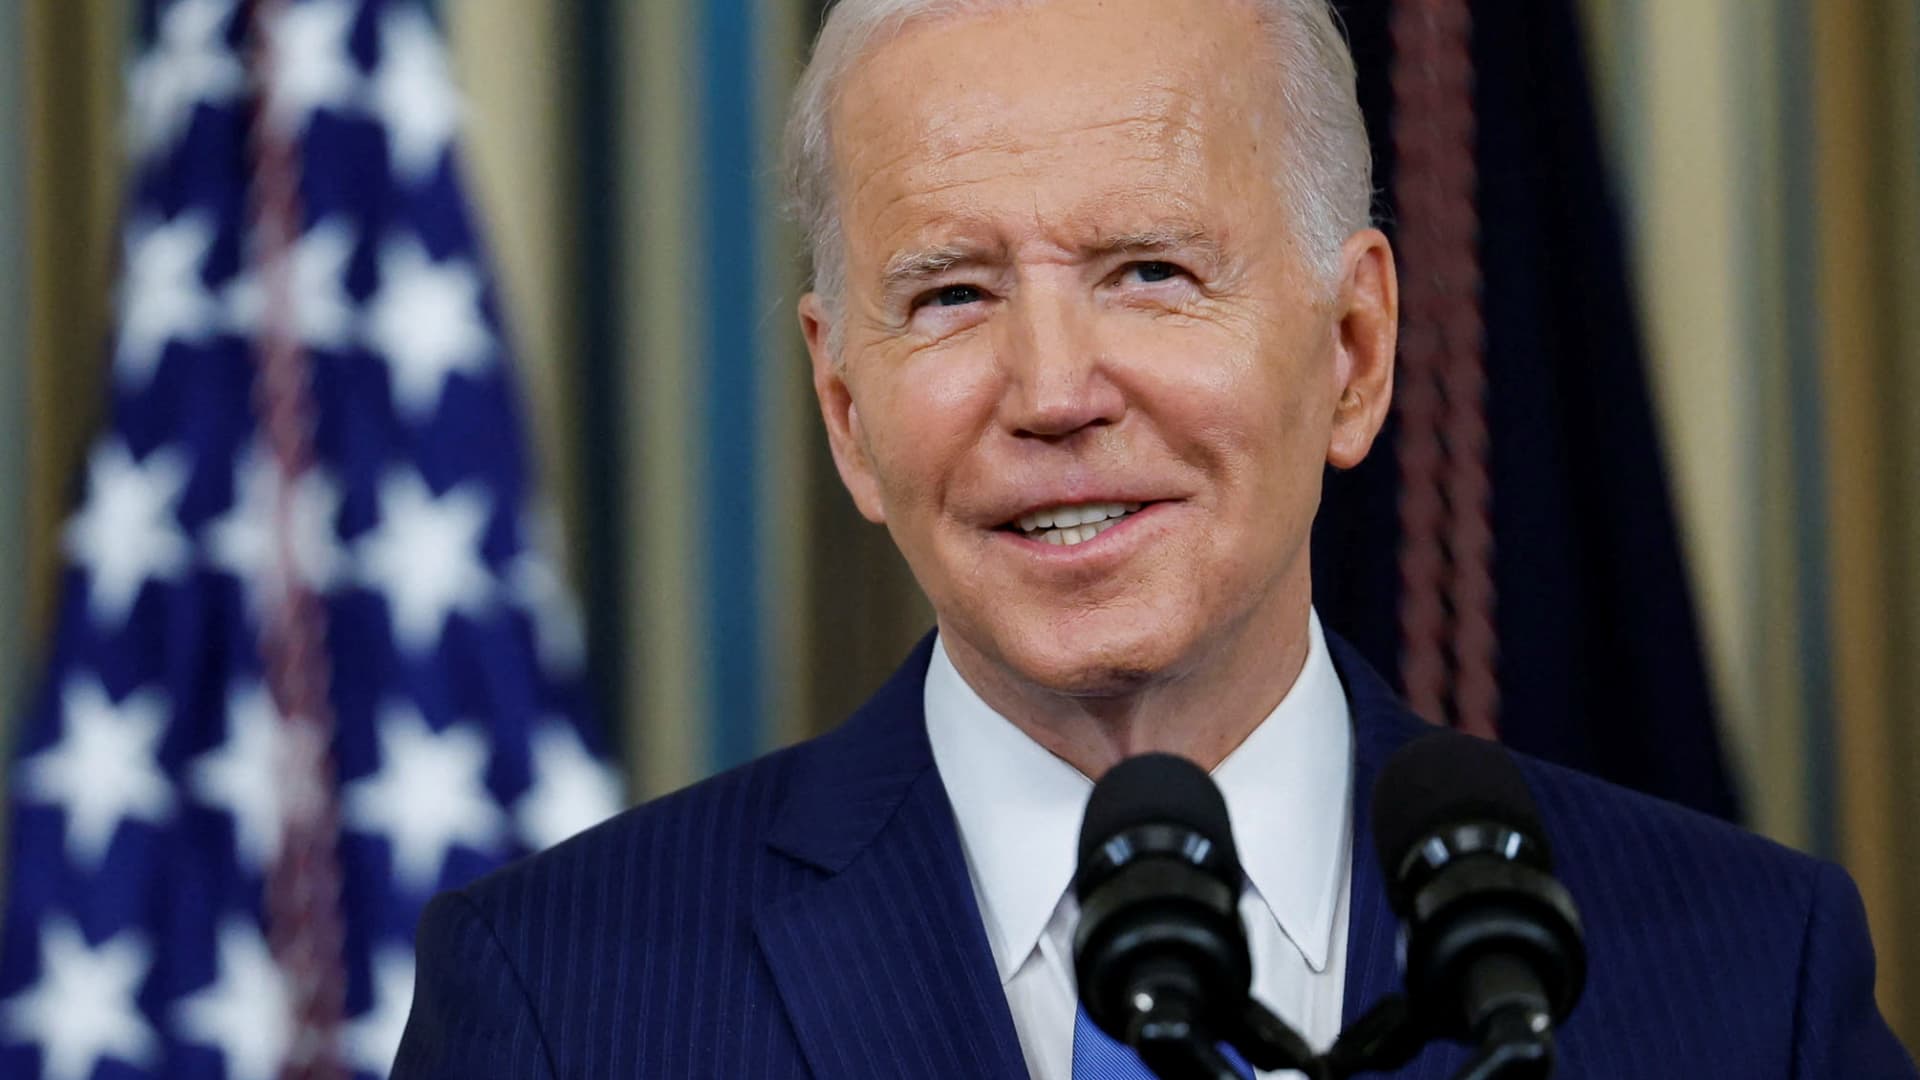 Biden, slamming Putin’s weaponization of fossil fuels, outlines new climate fund..